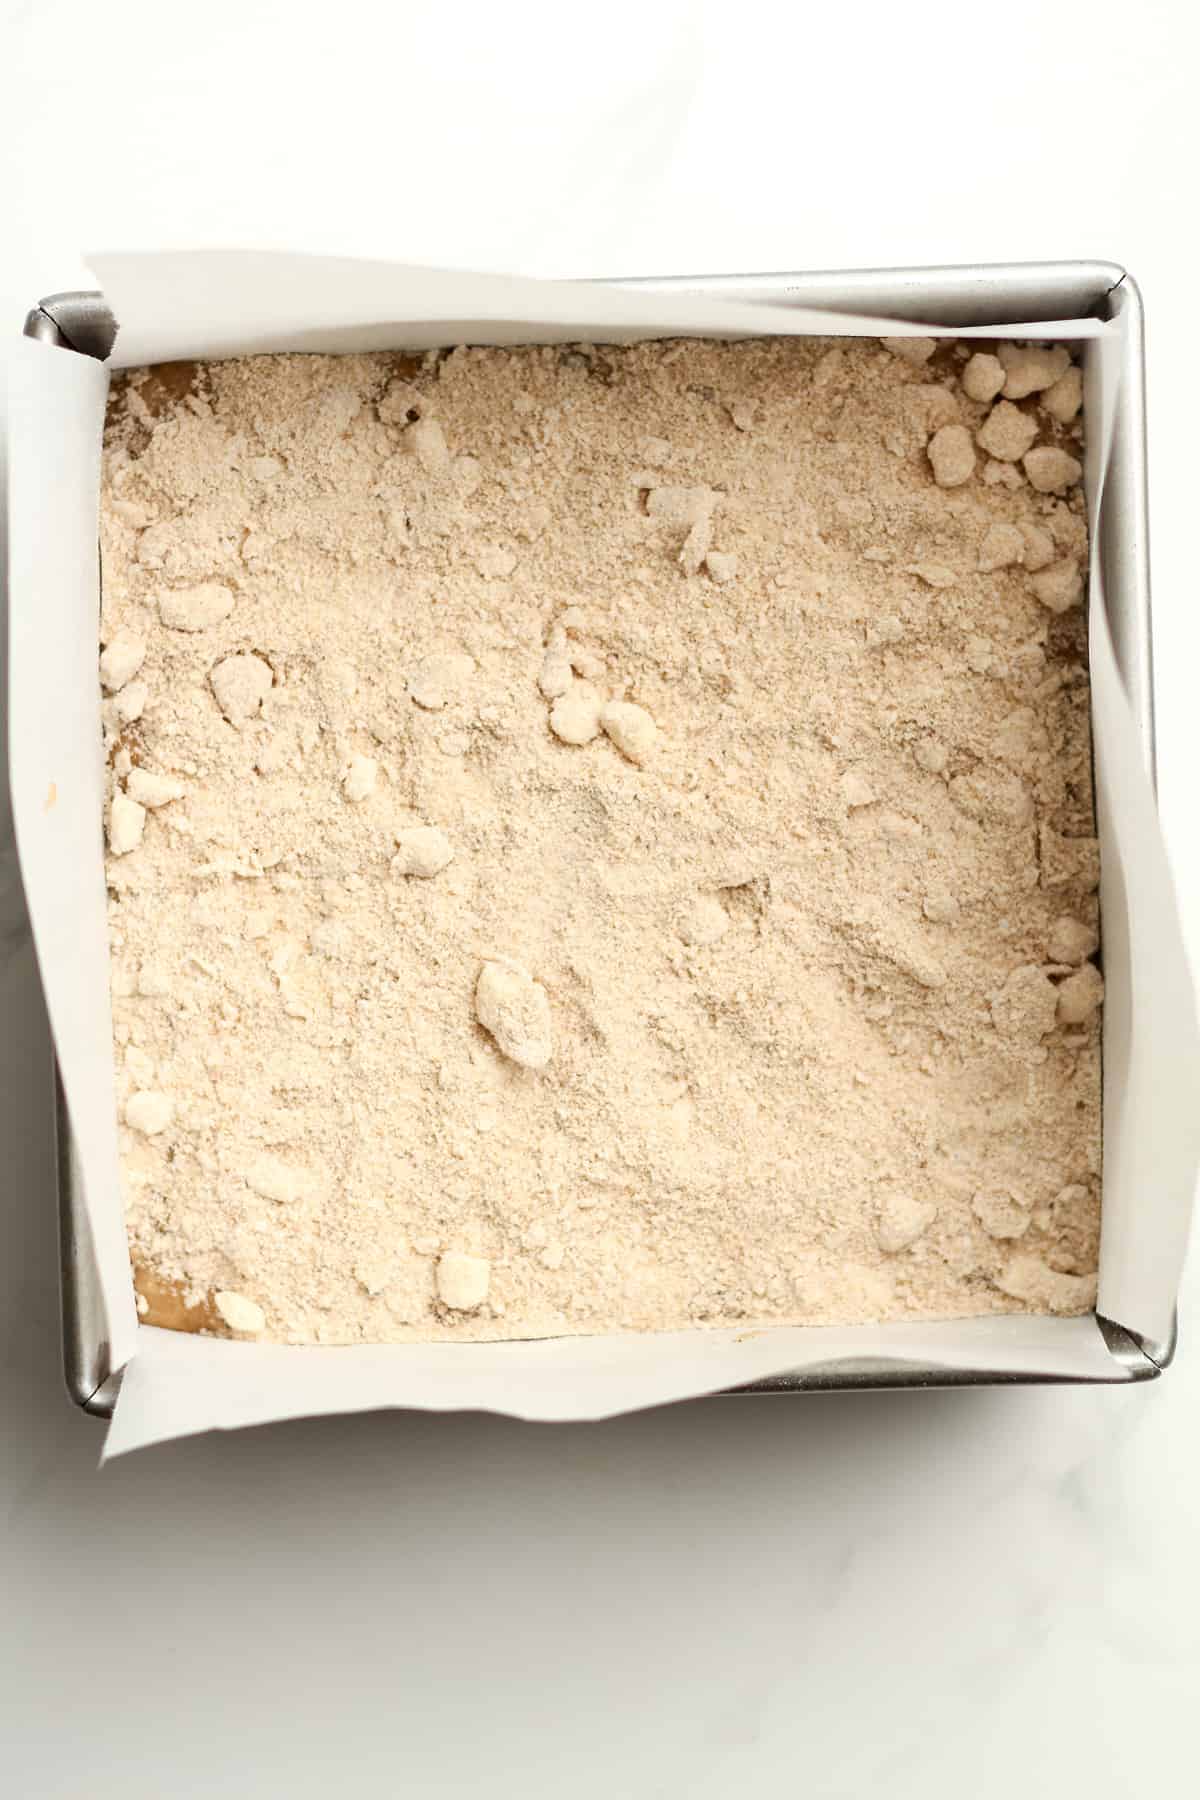 A square pan of the banana batter with the streusel topping on top.